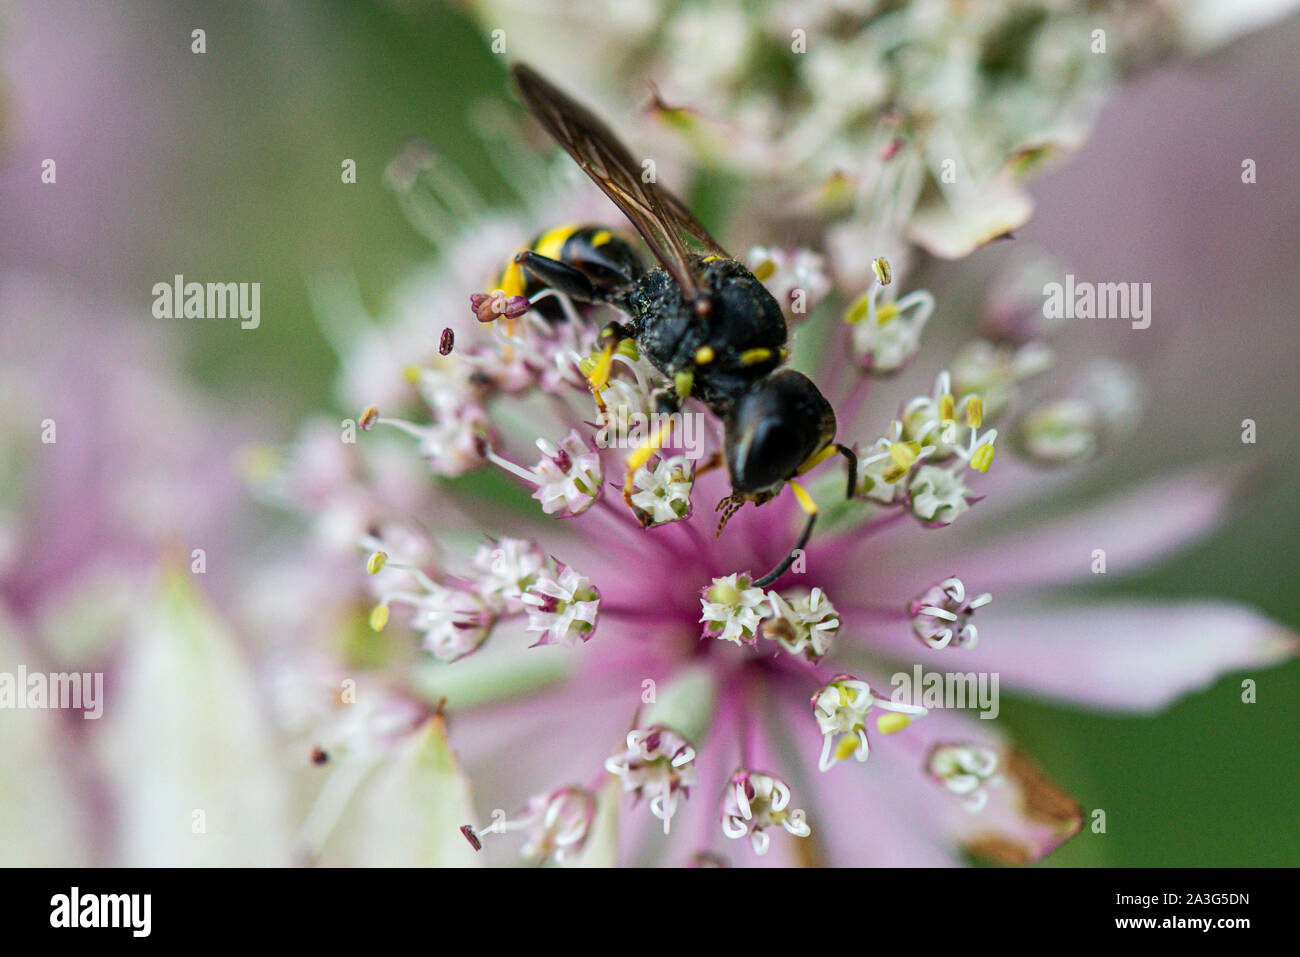 A digger wasps (Ectemnius cephalotes) on the flower an Astrantia Stock Photo